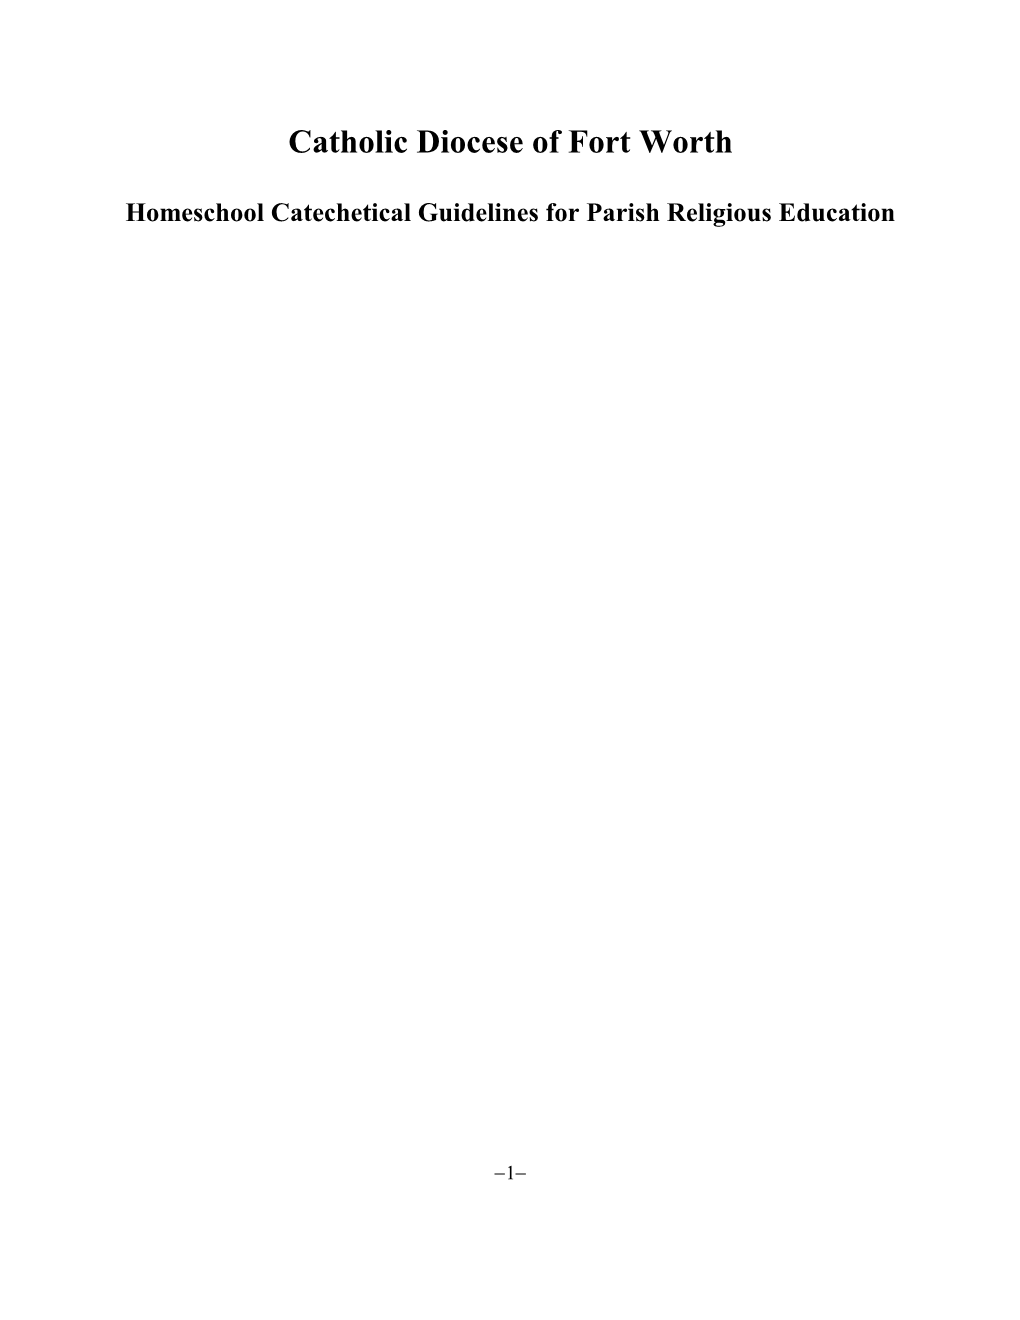 Homeschool Catechetical Guidelines for Parish Religious Education